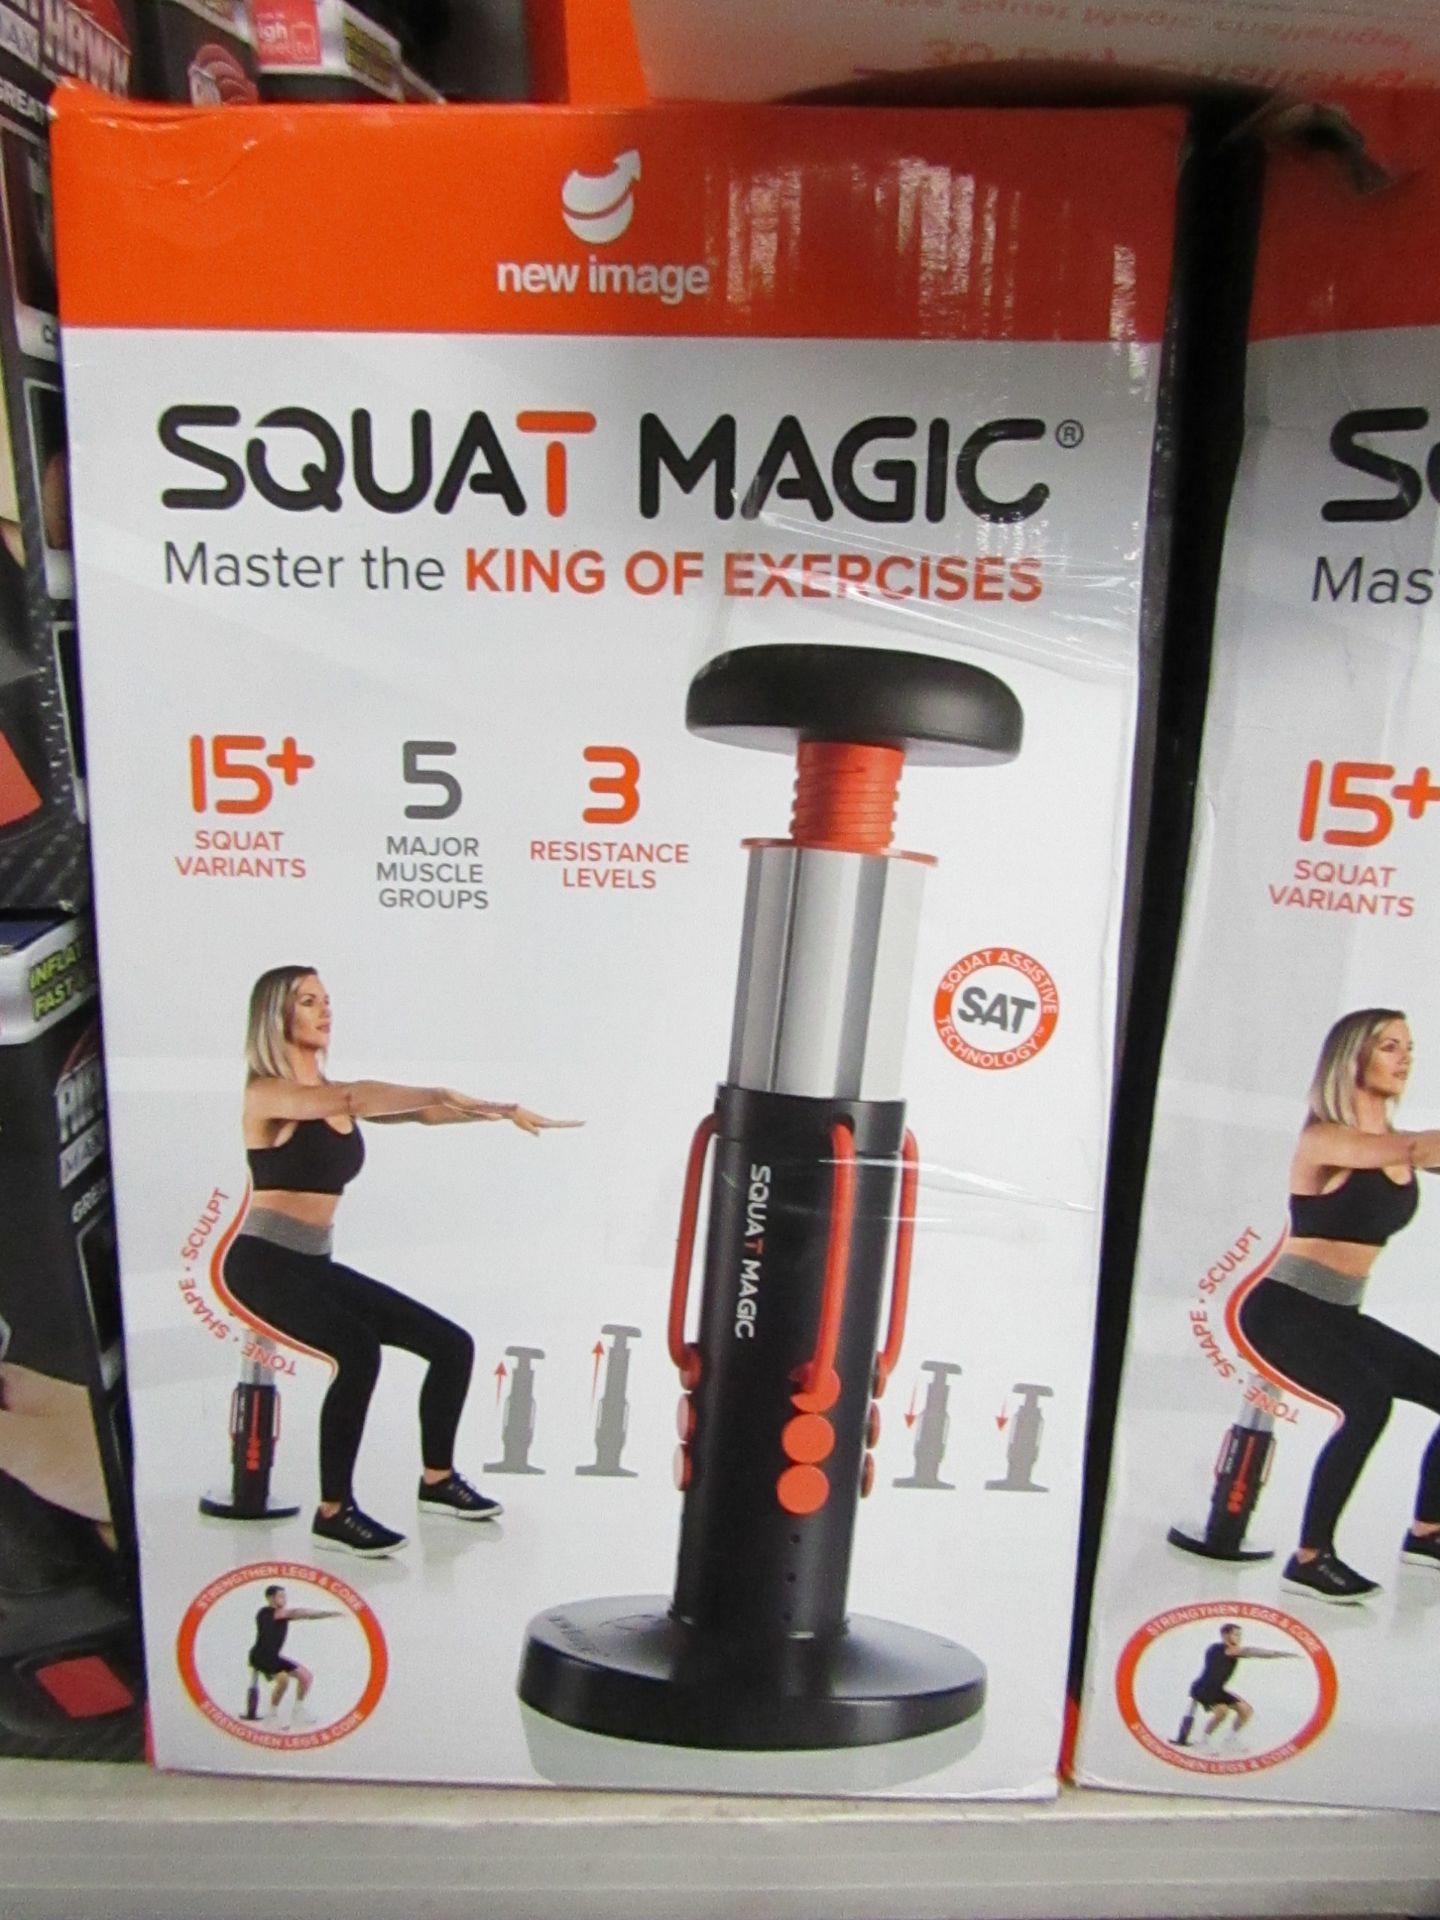 | 1x | NEW IMAGE SQUAT MAGIC | UNTESTED & BOXED | NO ONLINE RE-SALE | SKU - | RRP £59.99 |